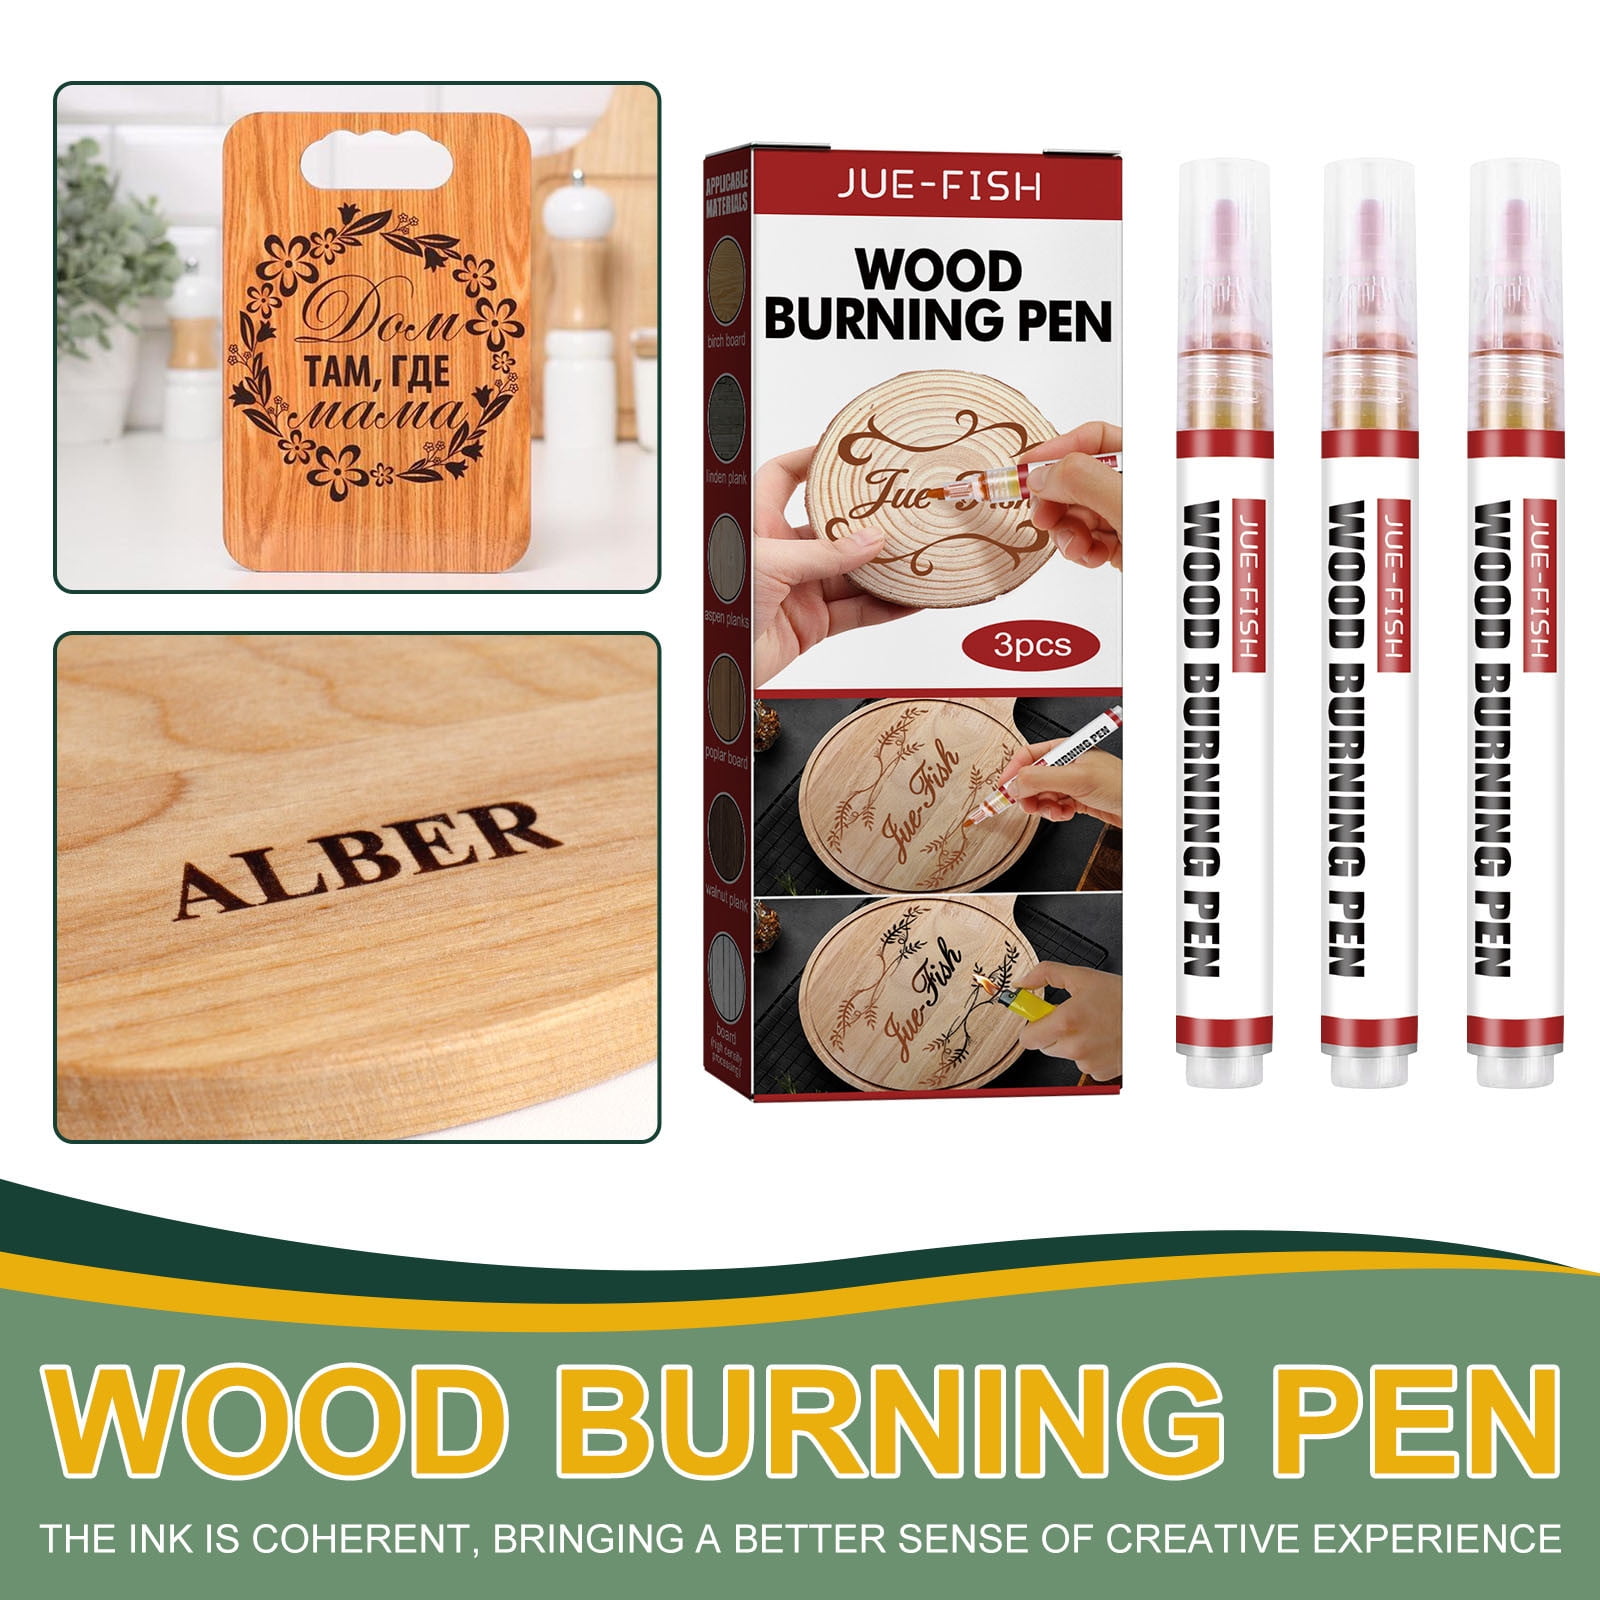 SUIUBUY Scorch Pen Marker - 3 PCS Wood Burning Pen Tool with Replacement  Tip, Chemical Wood Burner